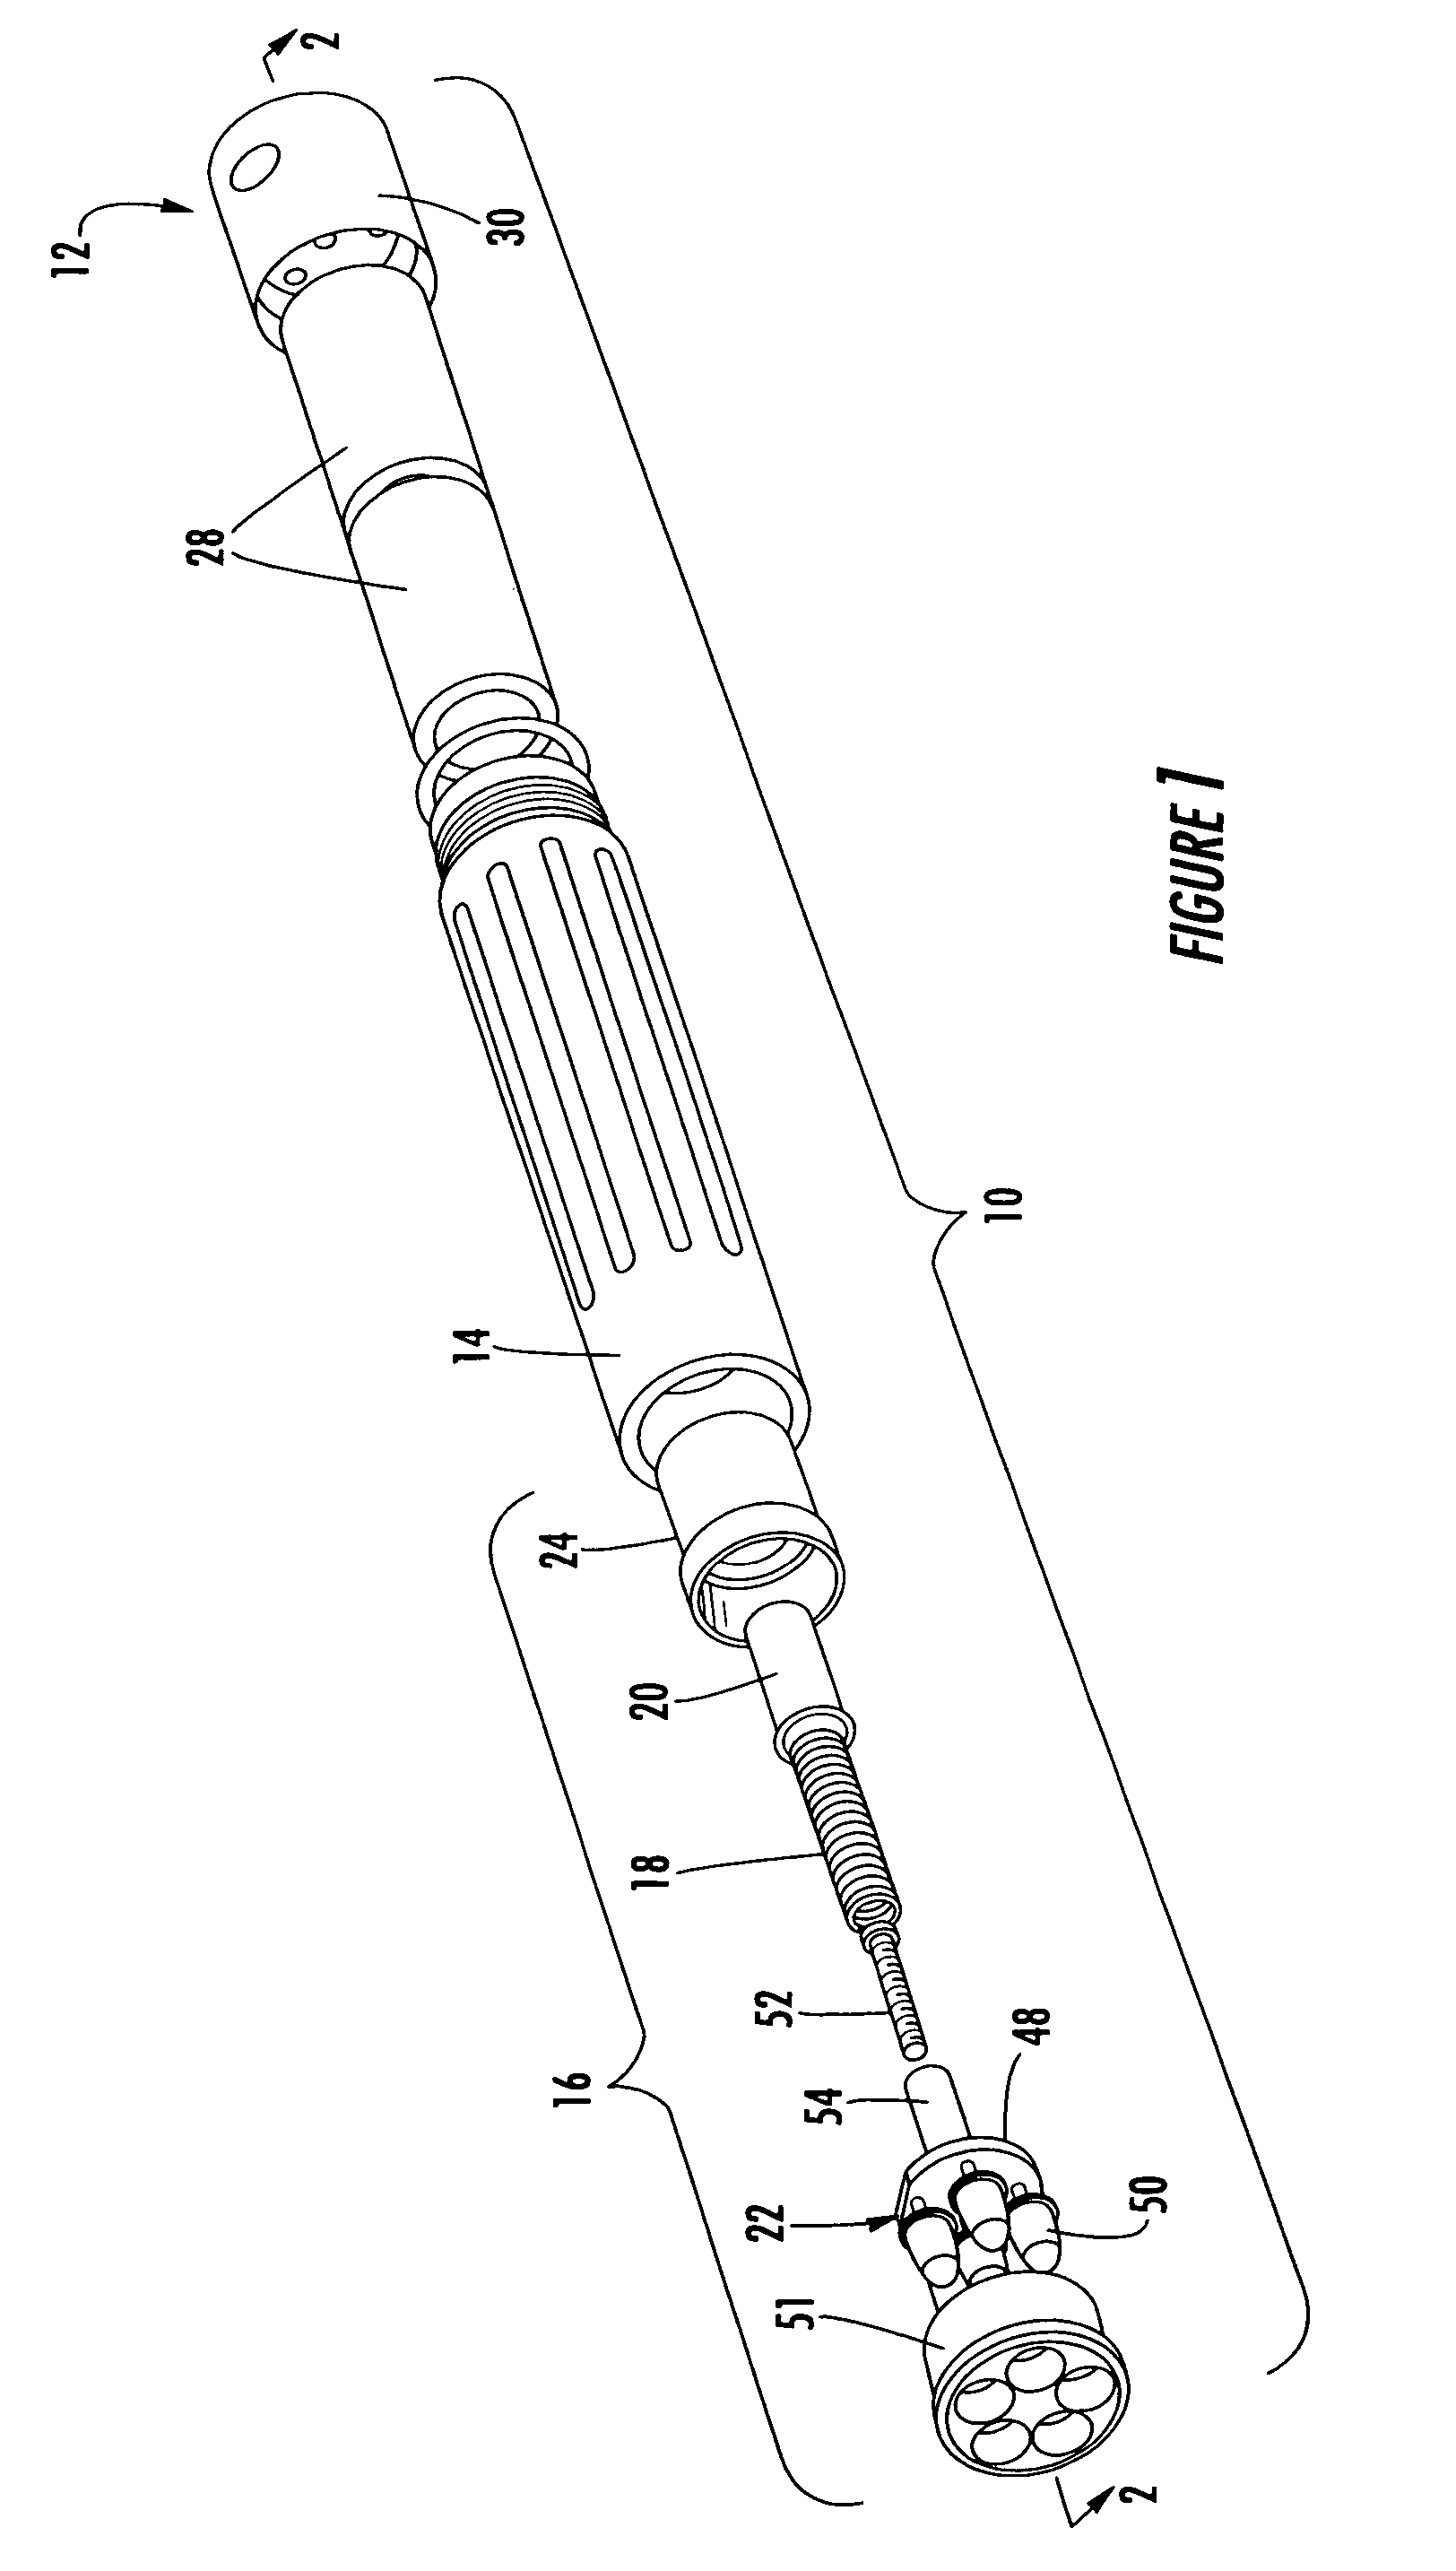 Dual mode switch mechanism for flashlights